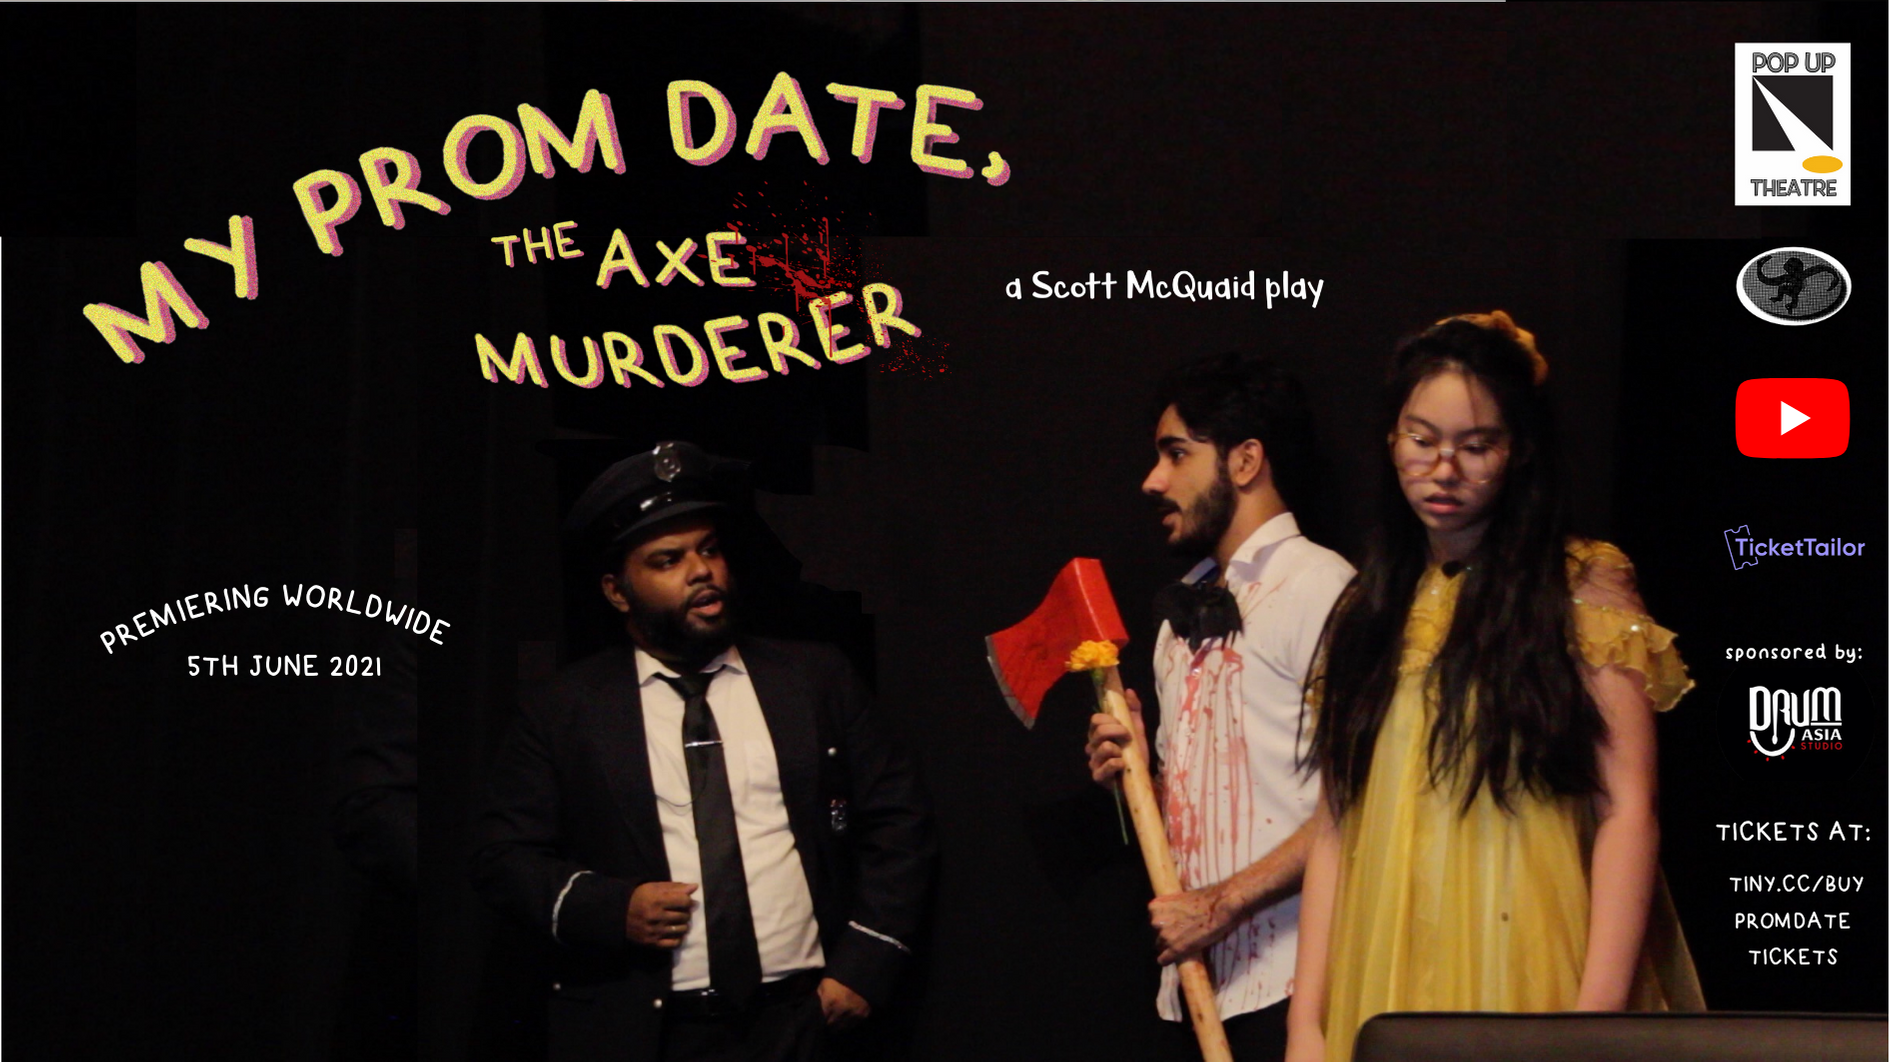 Luqman Suhaib as the 'Policeman', in 'My Prom Date, The Axe Murderer'.